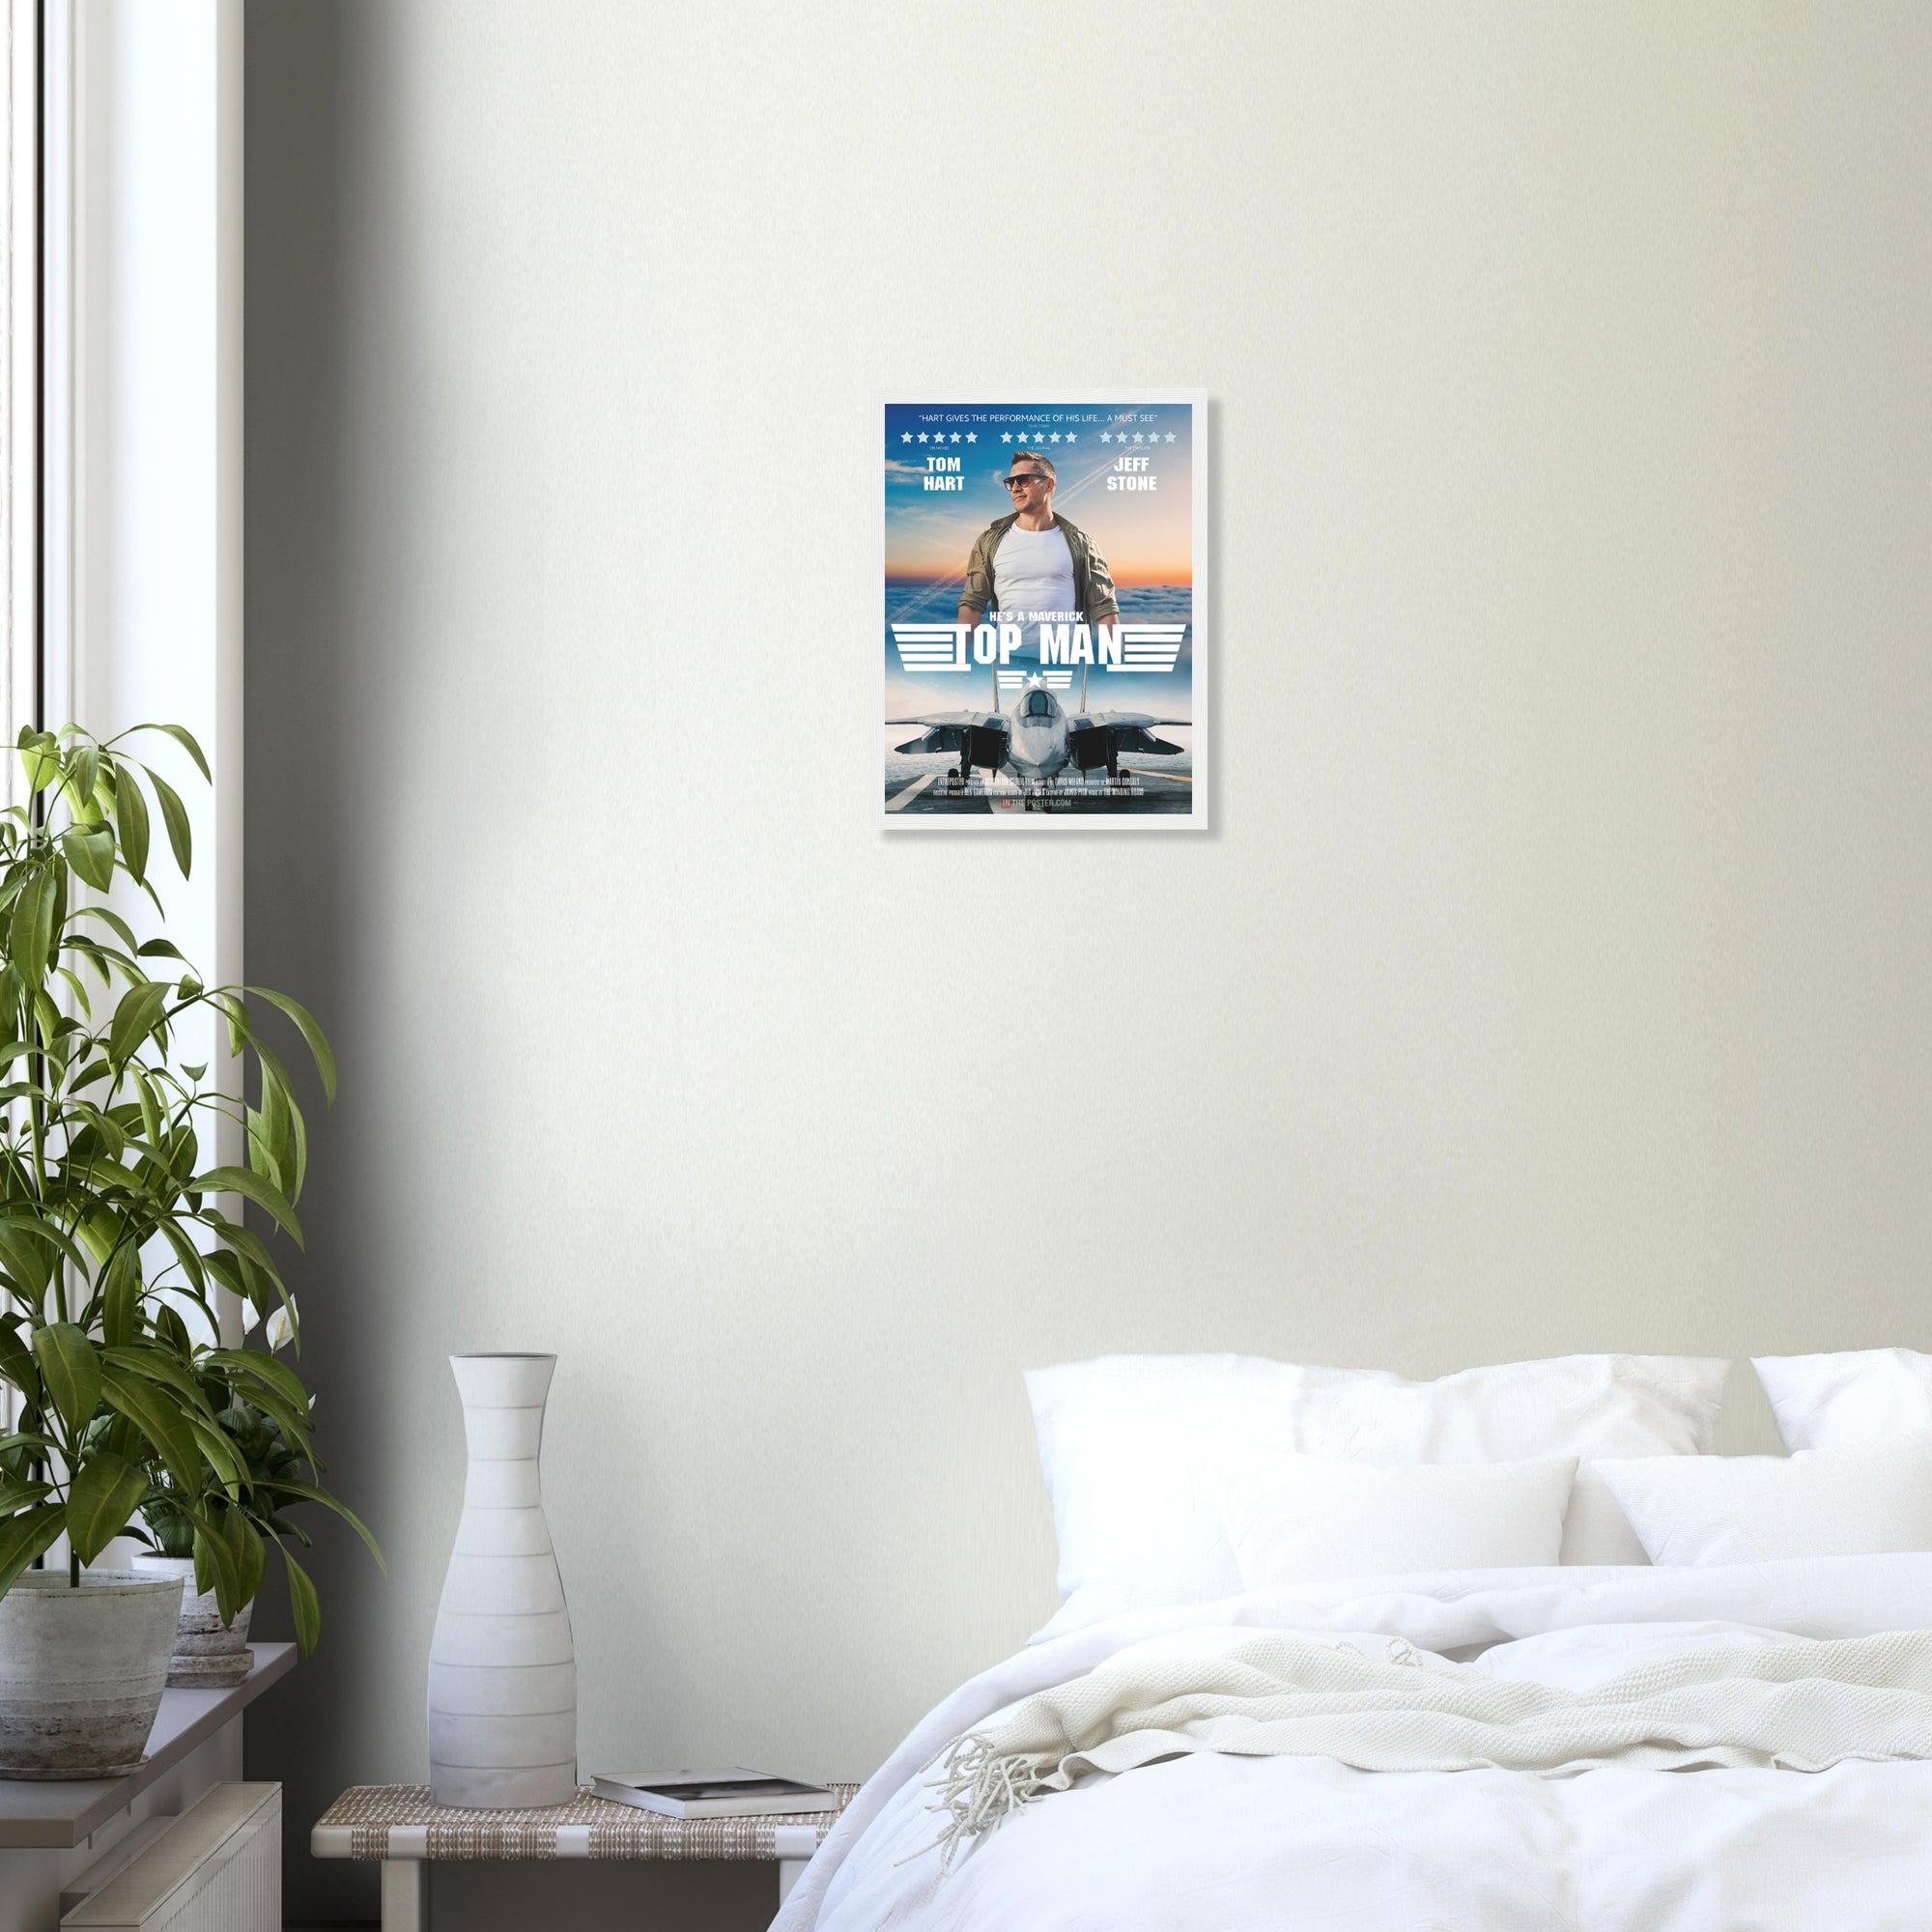 A fighter jet movie poster in small size and a white frame, on a grey wall above a bed and green house plant